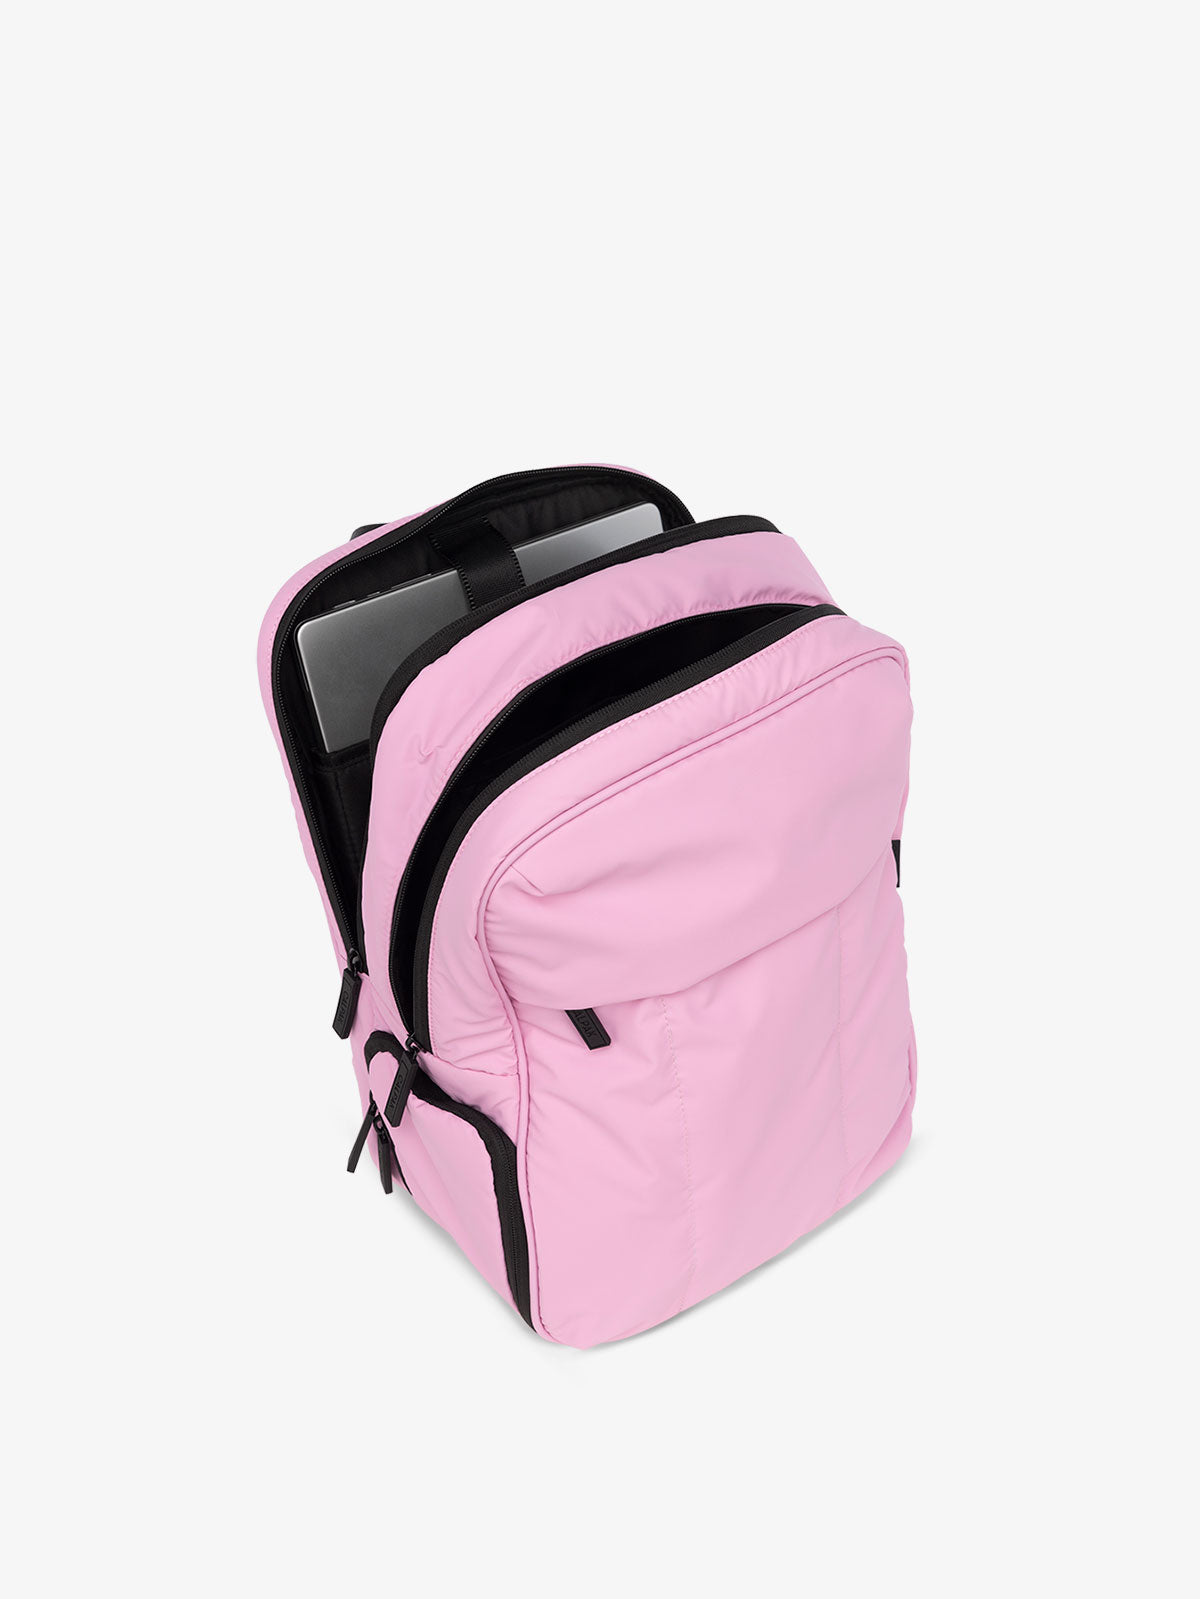 CALPAK Luka Laptop Backpack for travel with multiple compartments in bubblegum pink